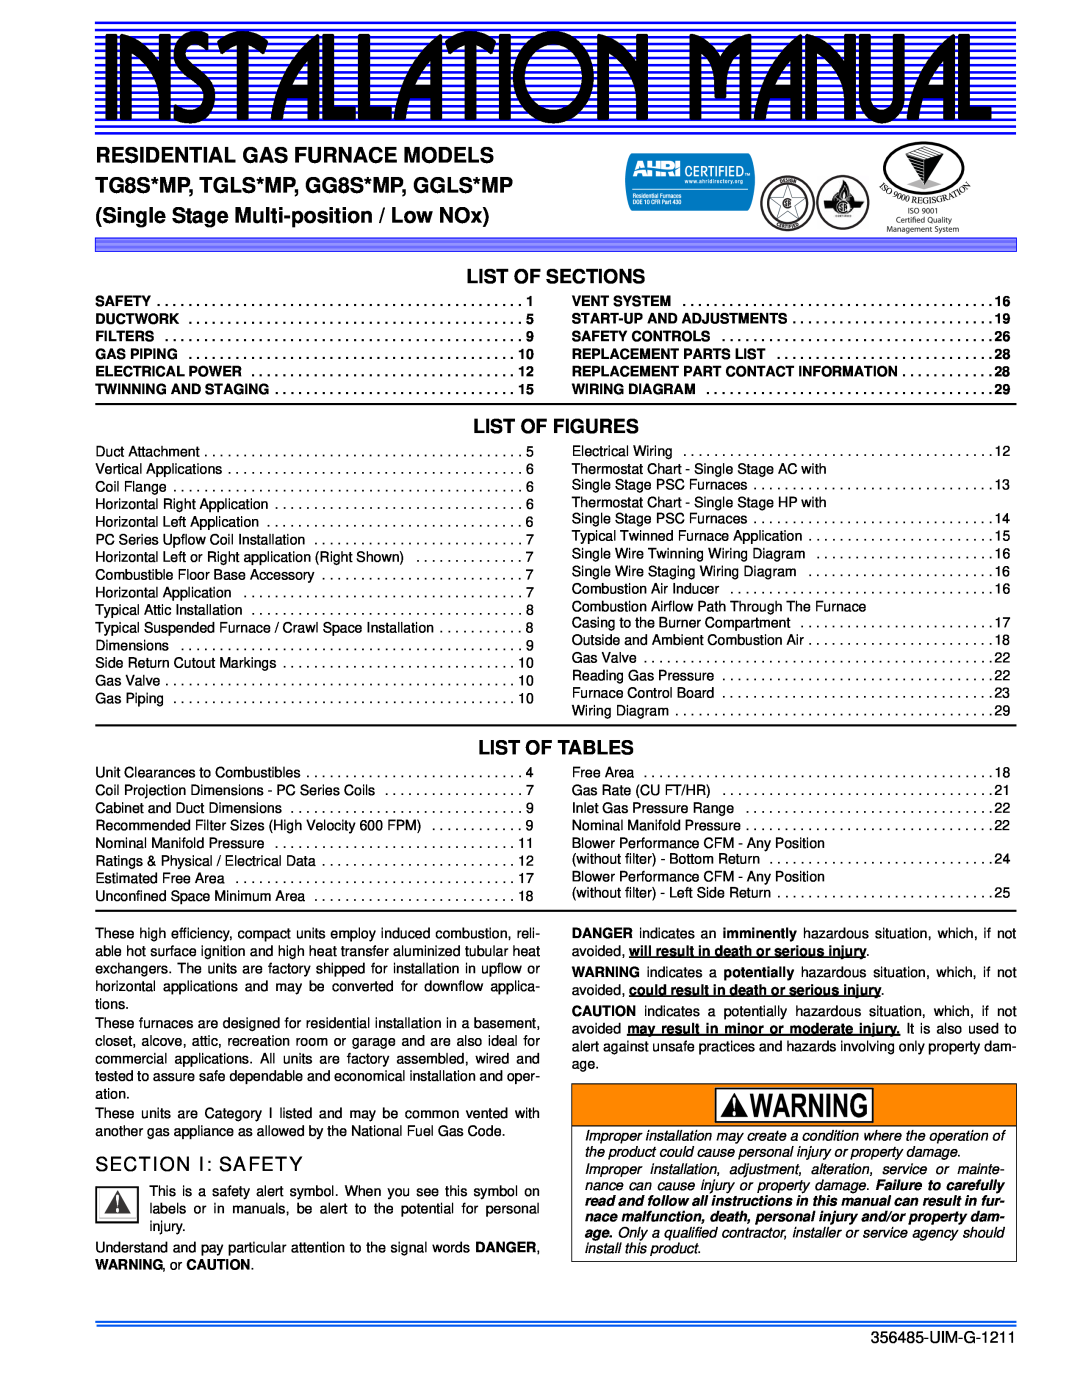 Johnson Controls TG8S*MP, TGLS*MP installation manual List Of Sections, List Of Figures, List Of Tables, Section I Safety 